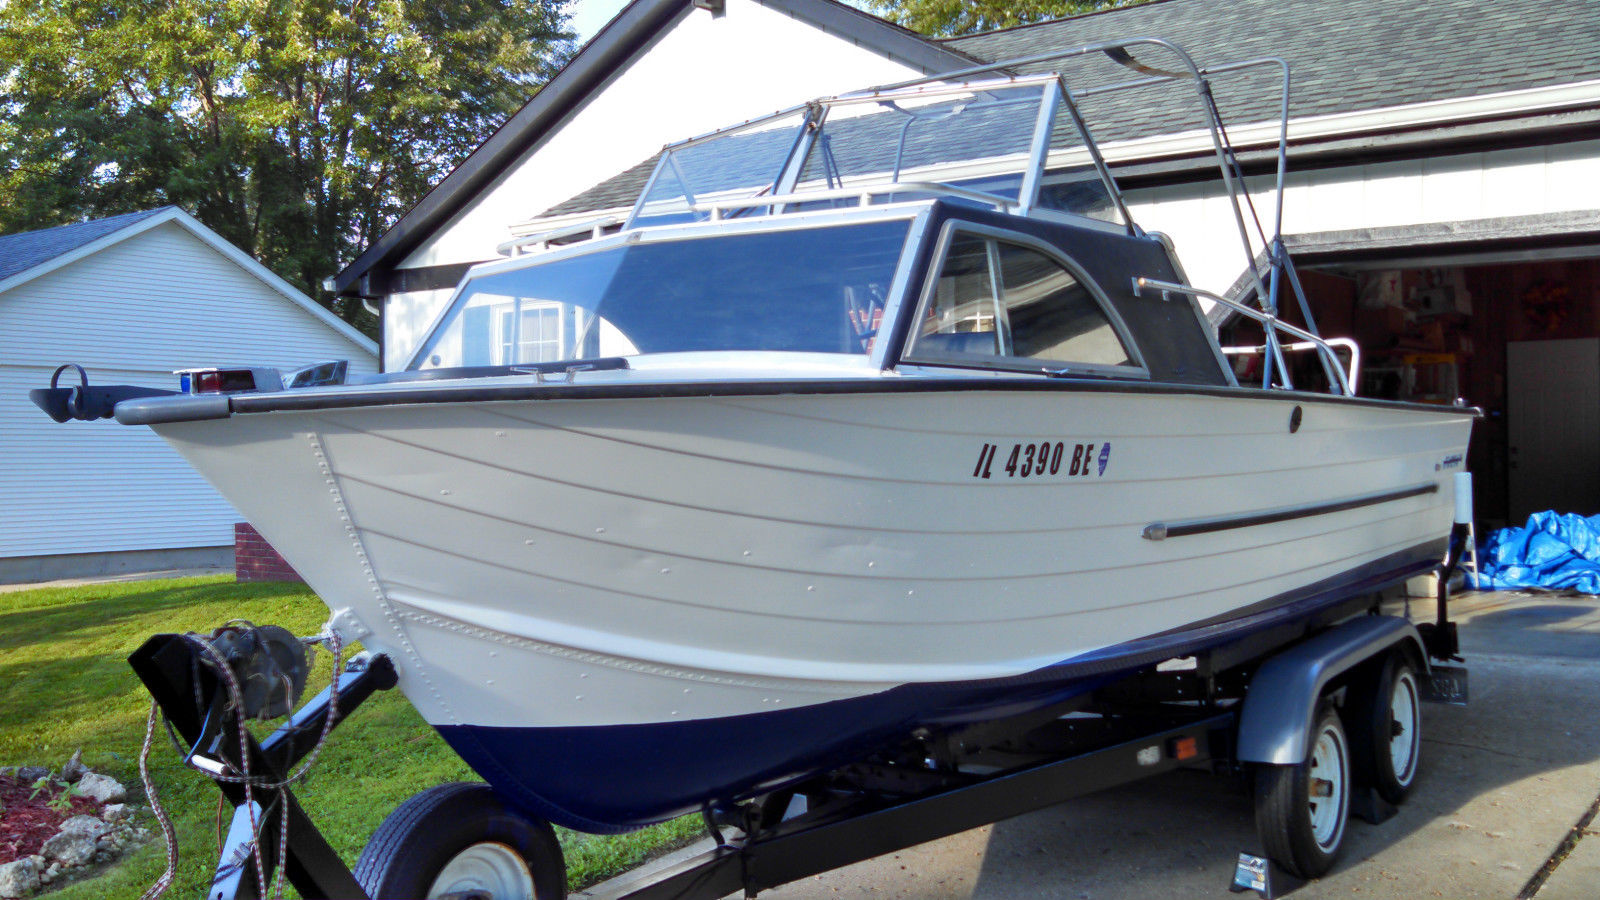 StarCraft Star Chief 1967 for sale for $1,450 - Boats-from ...